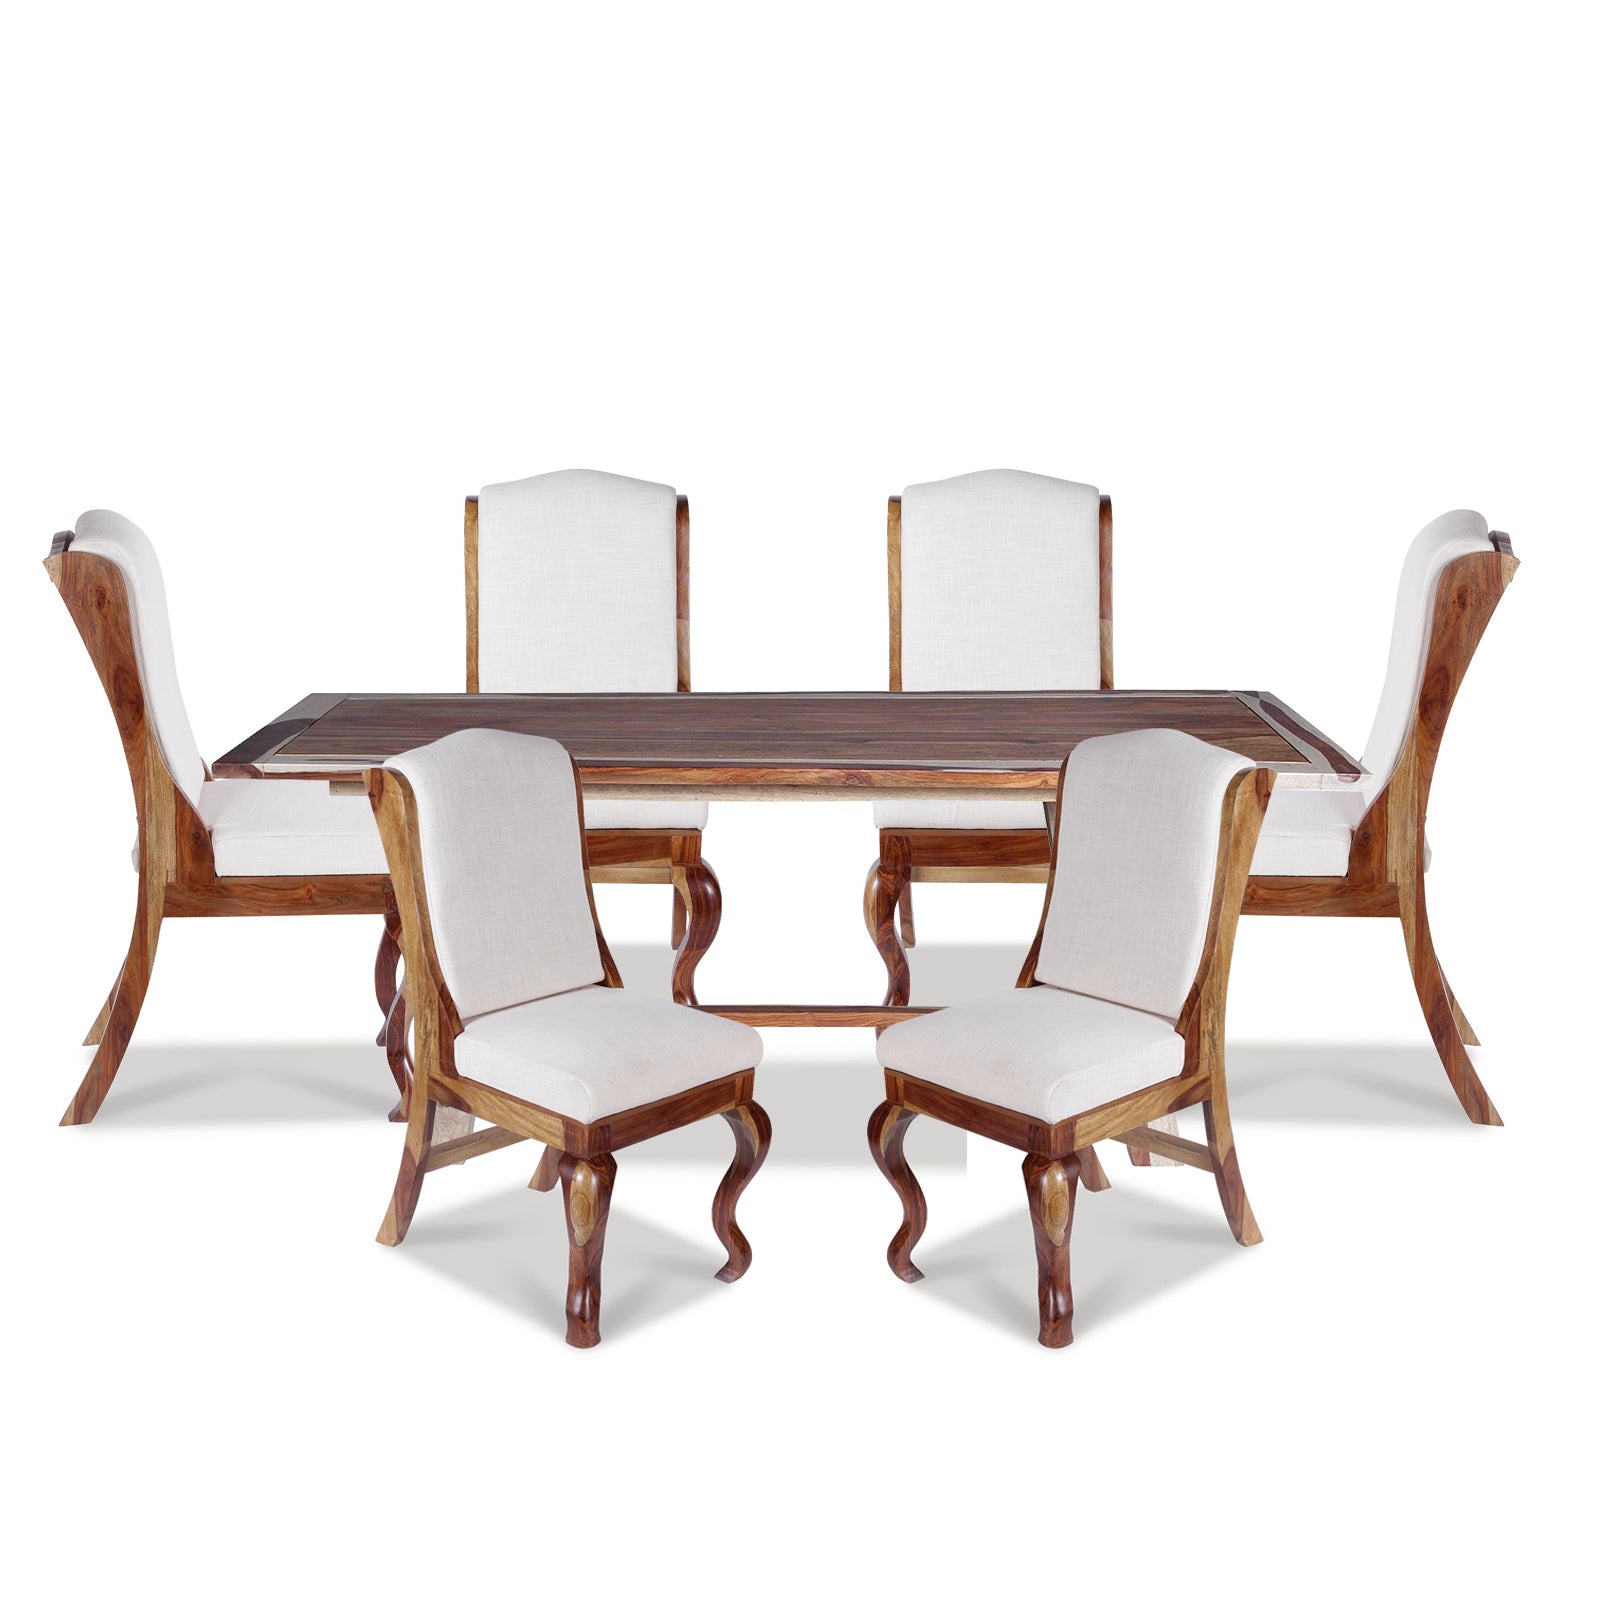 Paloma Solid Wood Six Seater Dining Set